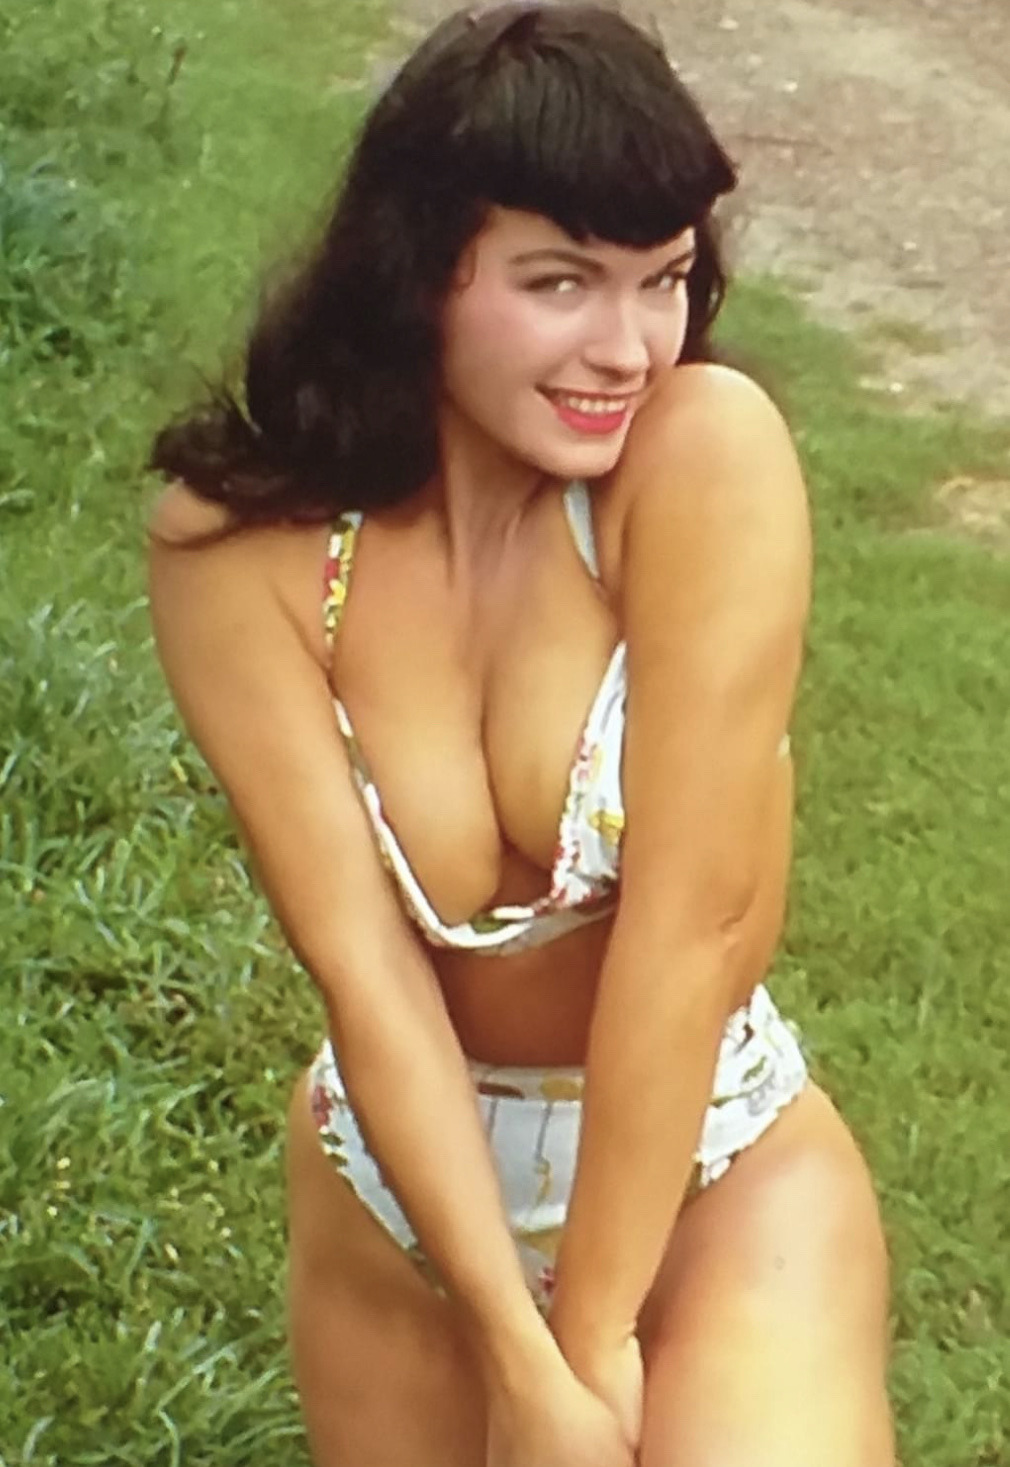 Bettie Page showing her boobs